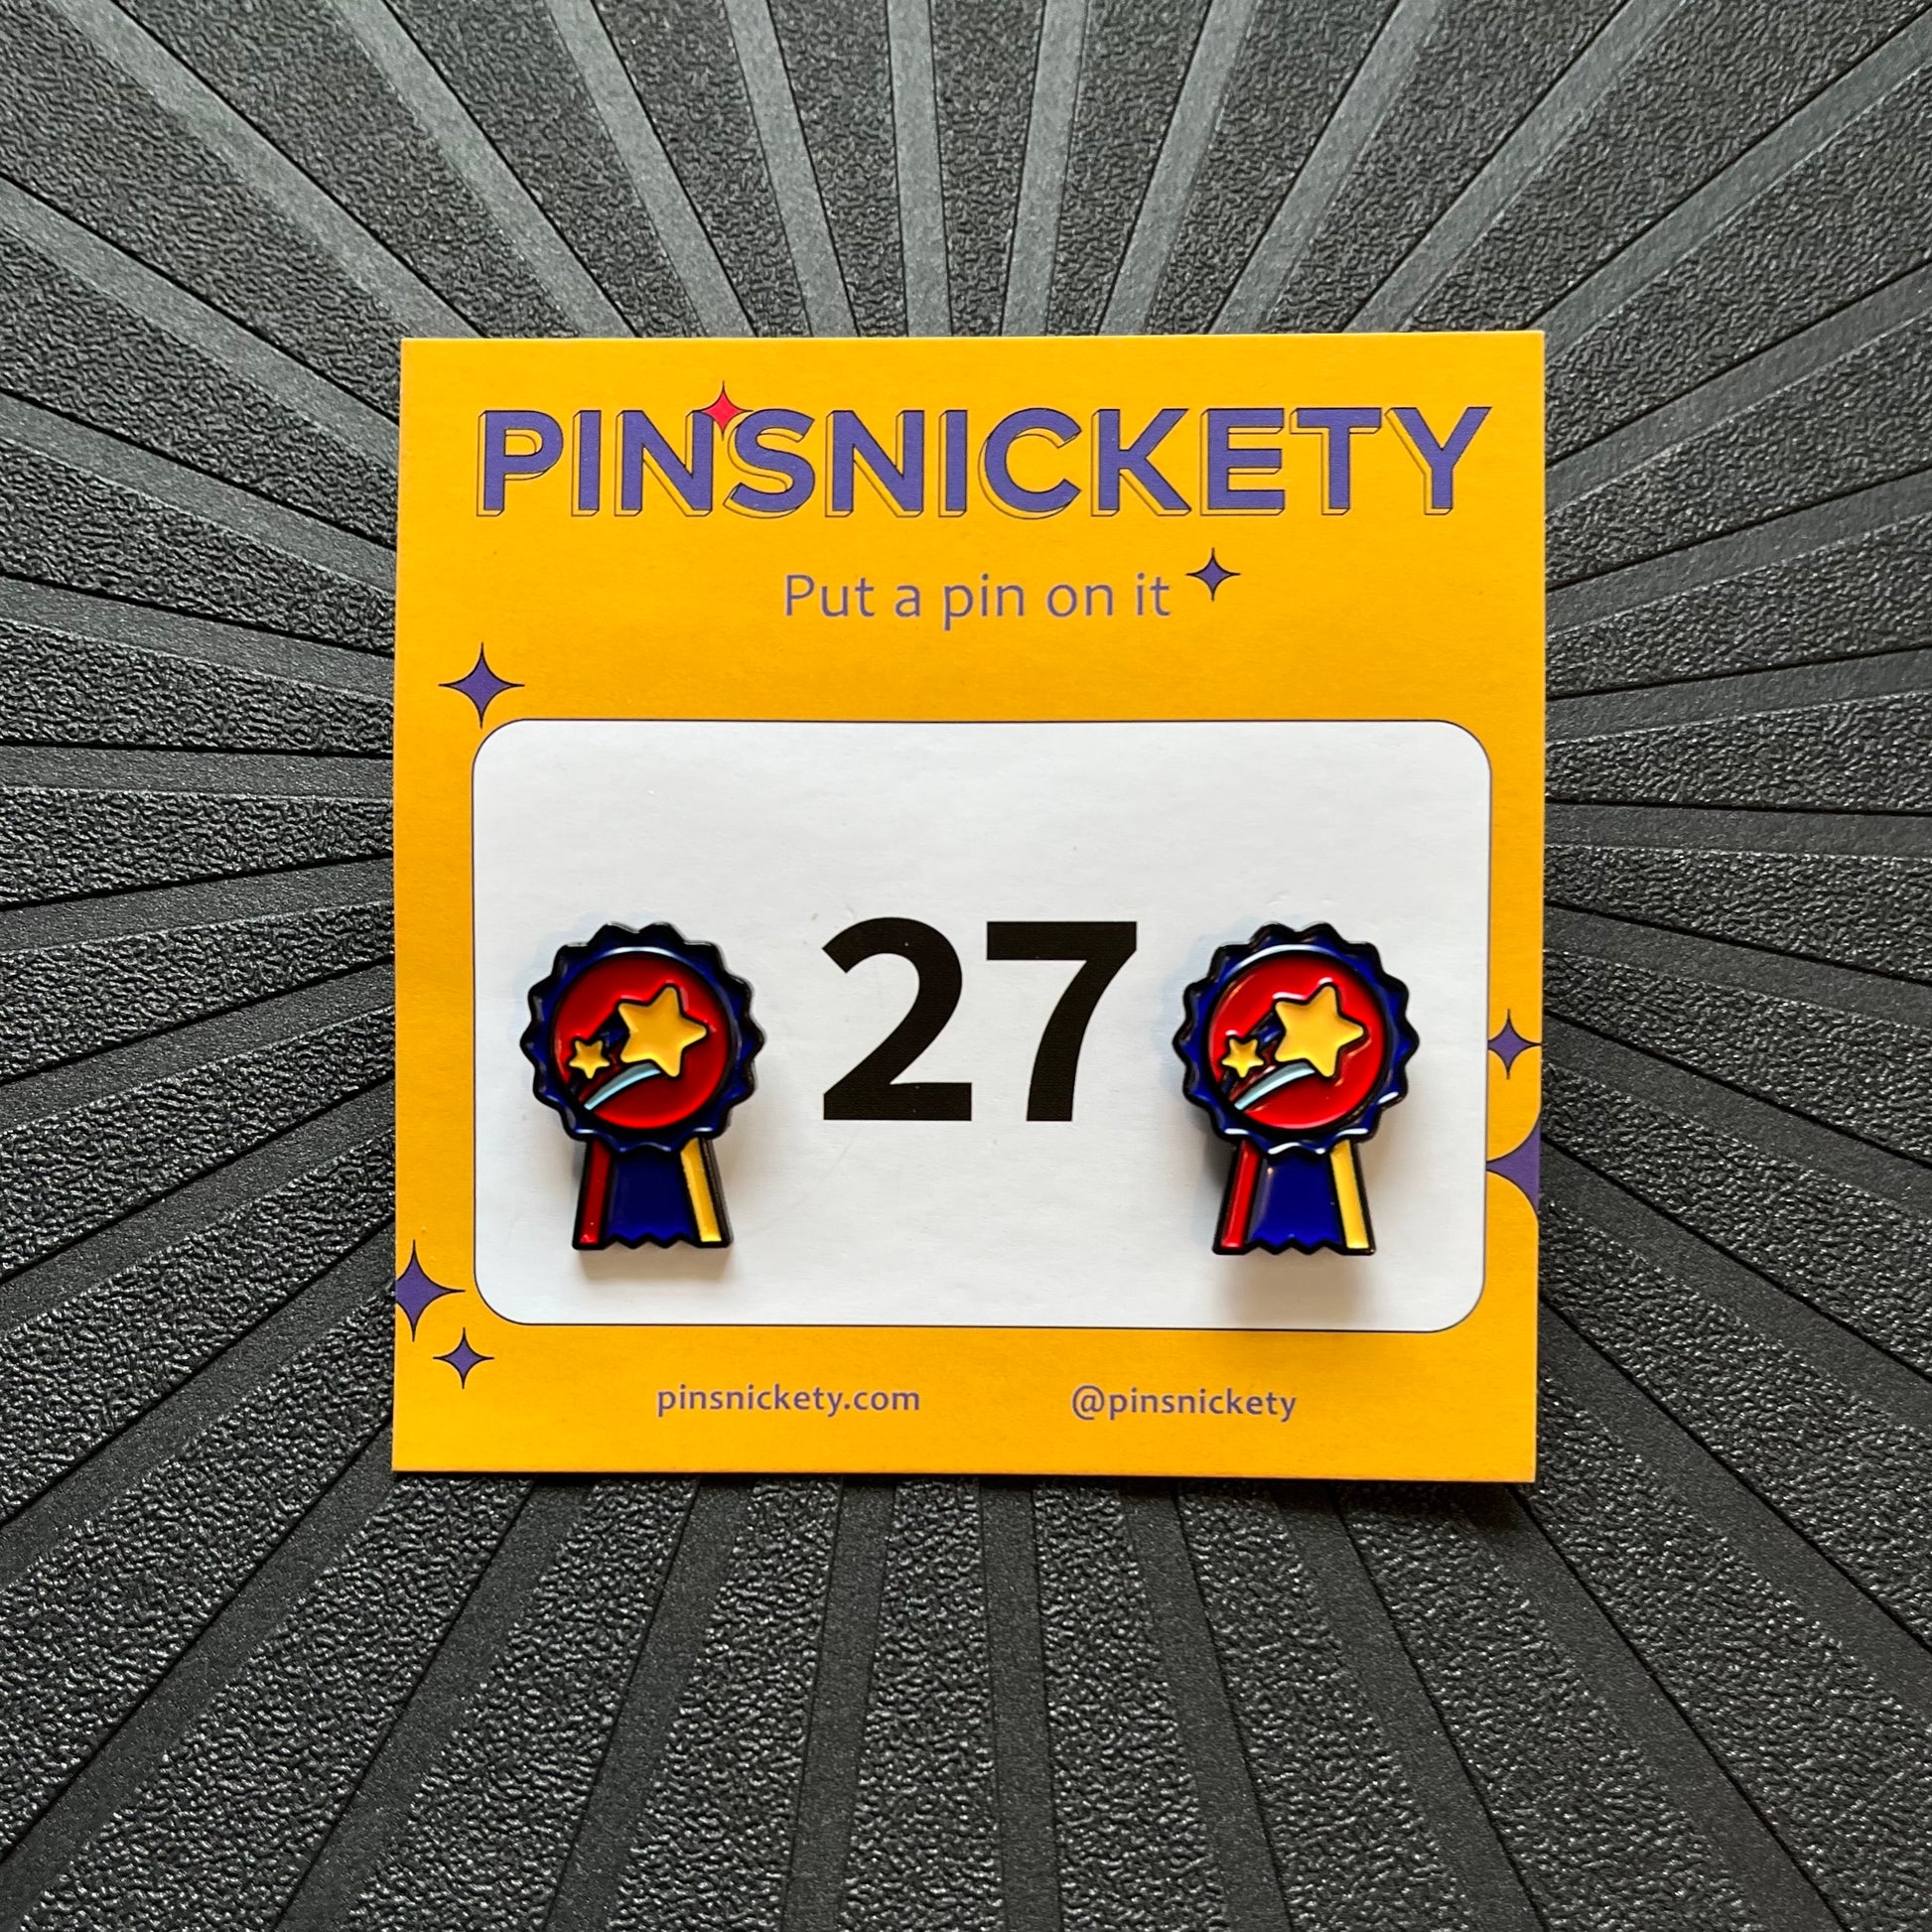 pinsnickety champion horse show number pins on their product packaging card